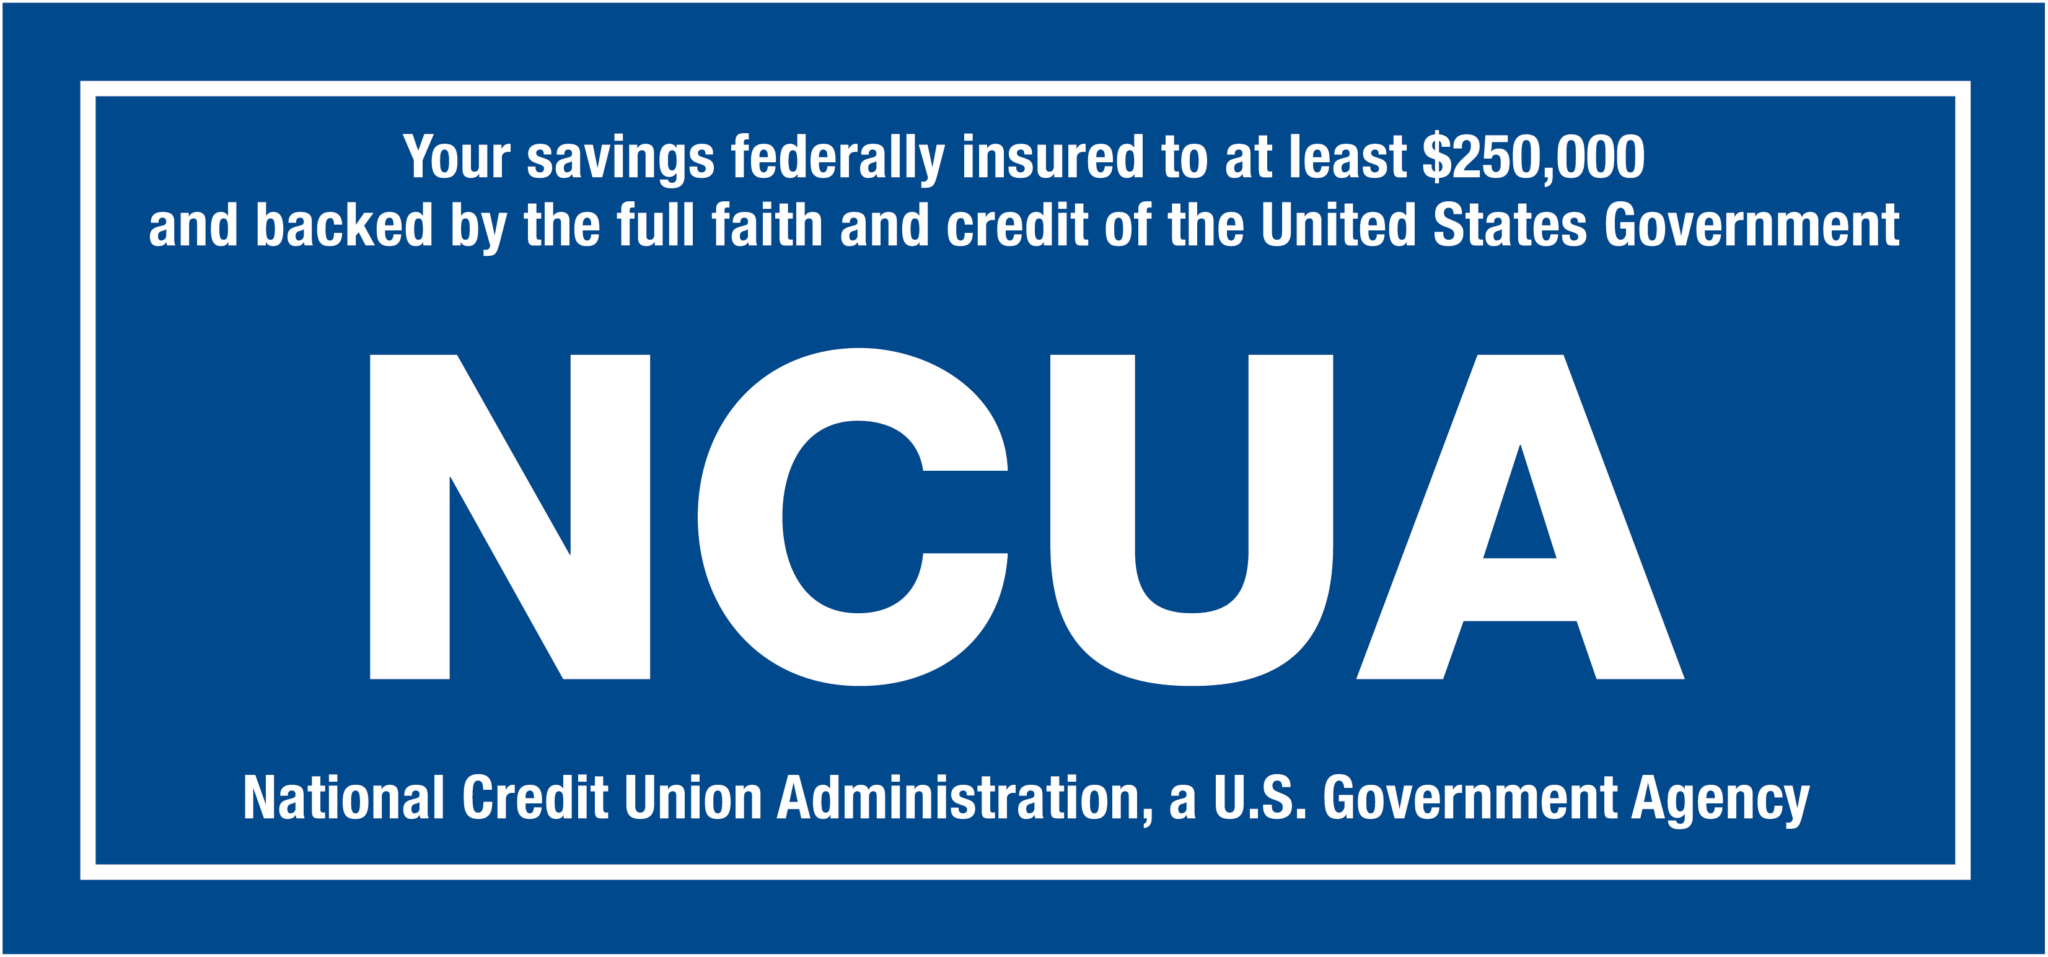 Your savings federally insured to at least $250,000 and backed by the full faith and credit of the United States Government. NCUA. National Credit Union Administration, a U.S. Government Agency